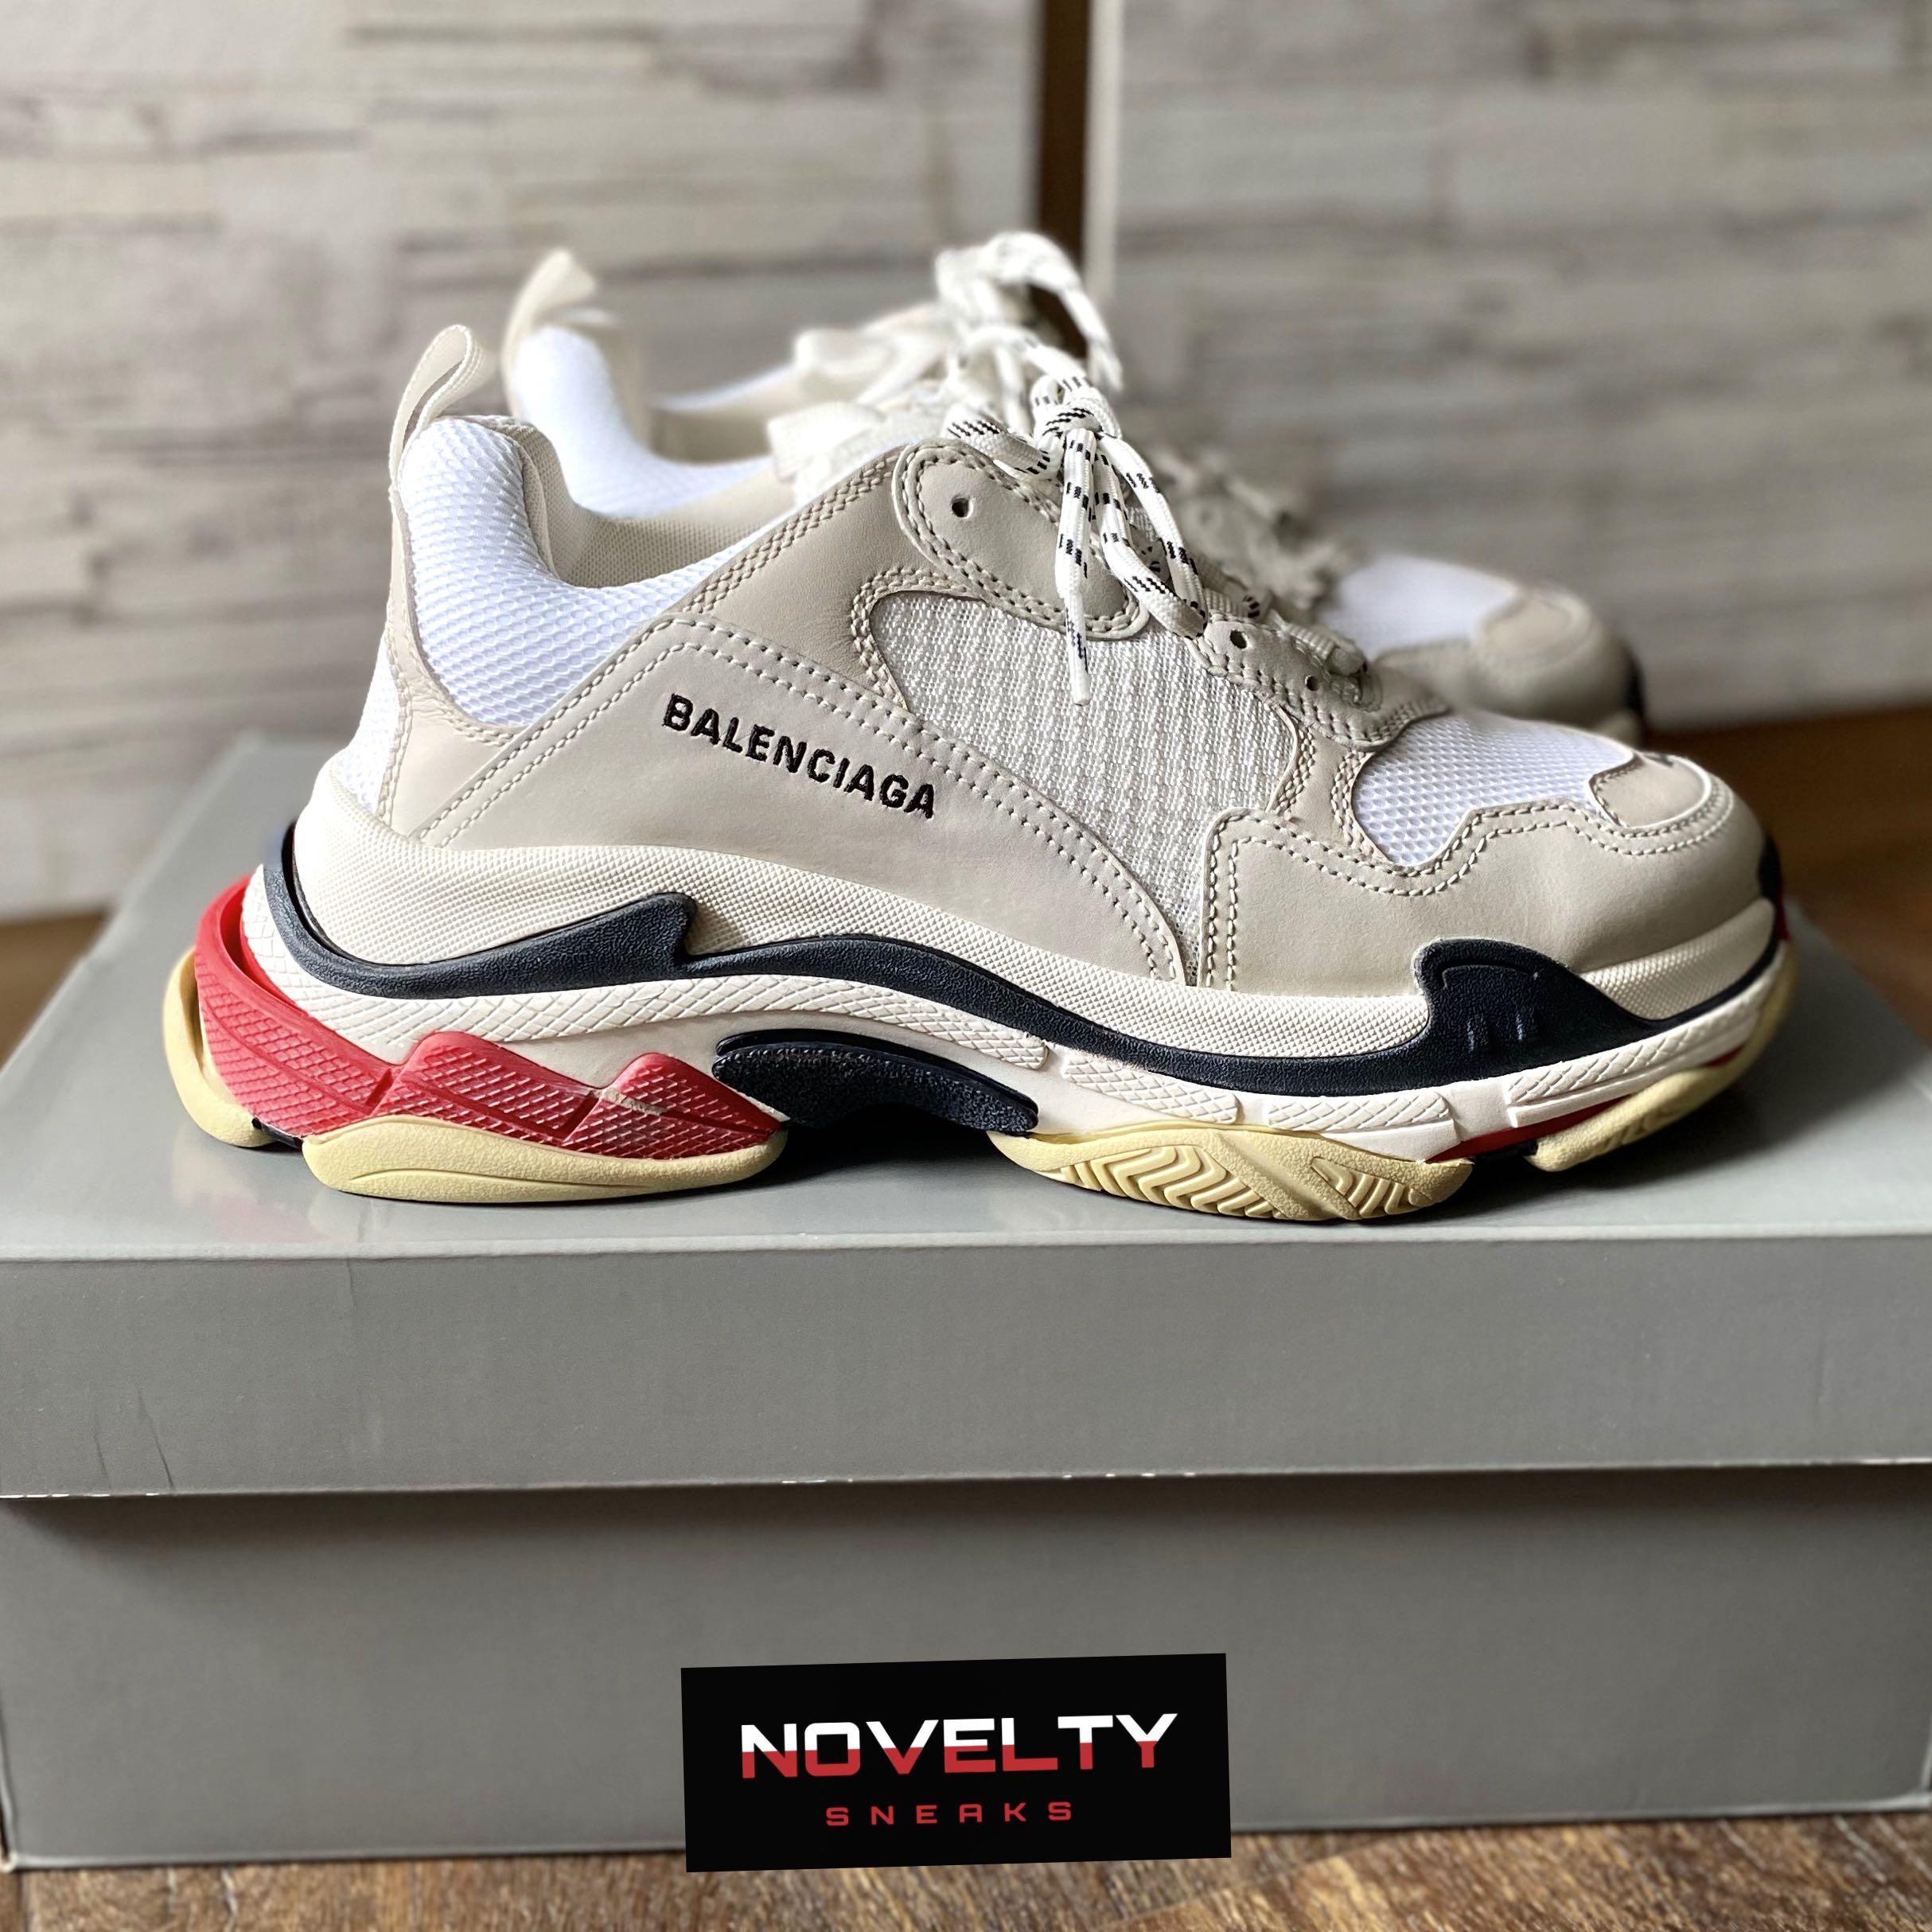 Sneakers Balenciaga Triple S worn by Alok on his account